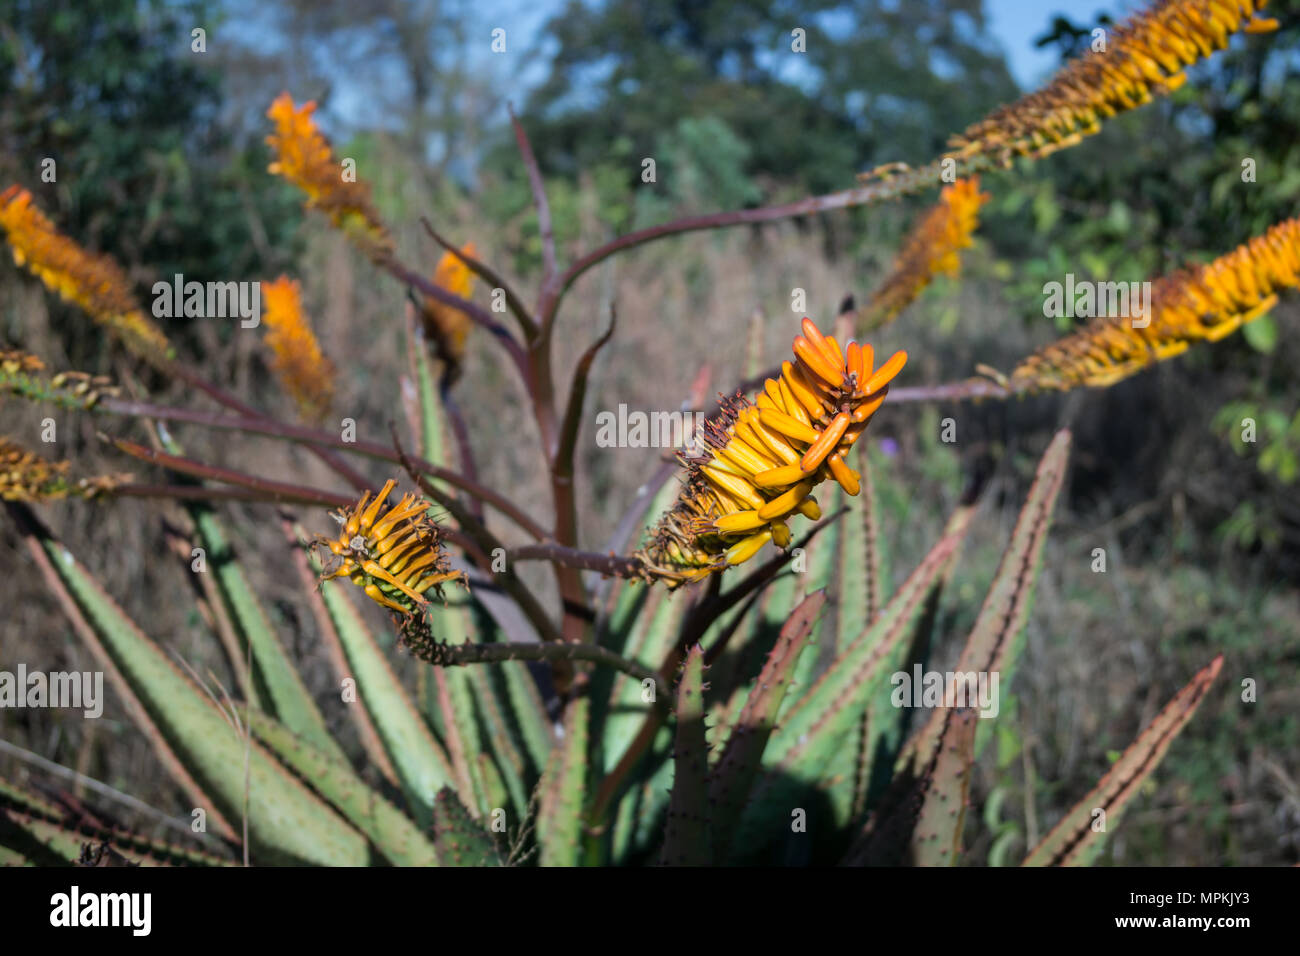 Wild, mature Aloe Vera plant (aloe barbadensis) with drooping inflorescence, orange tubular flowers and visible stamen in the bush Swaziland, Africa Stock Photo